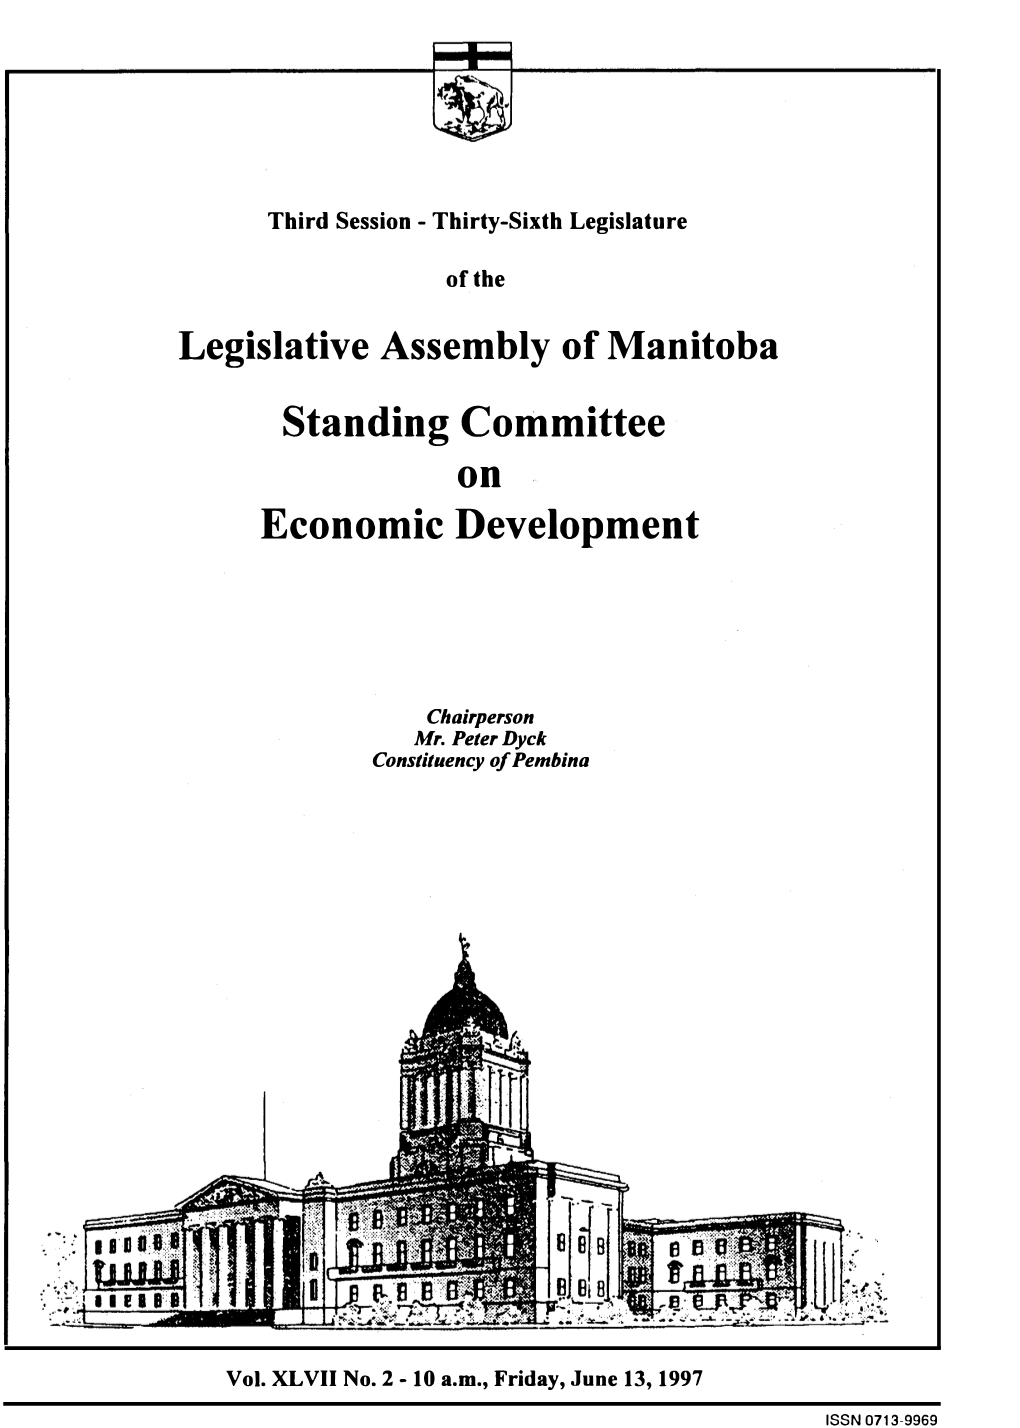 Legislative Assembly of Manitoba Standing Committee on Economic